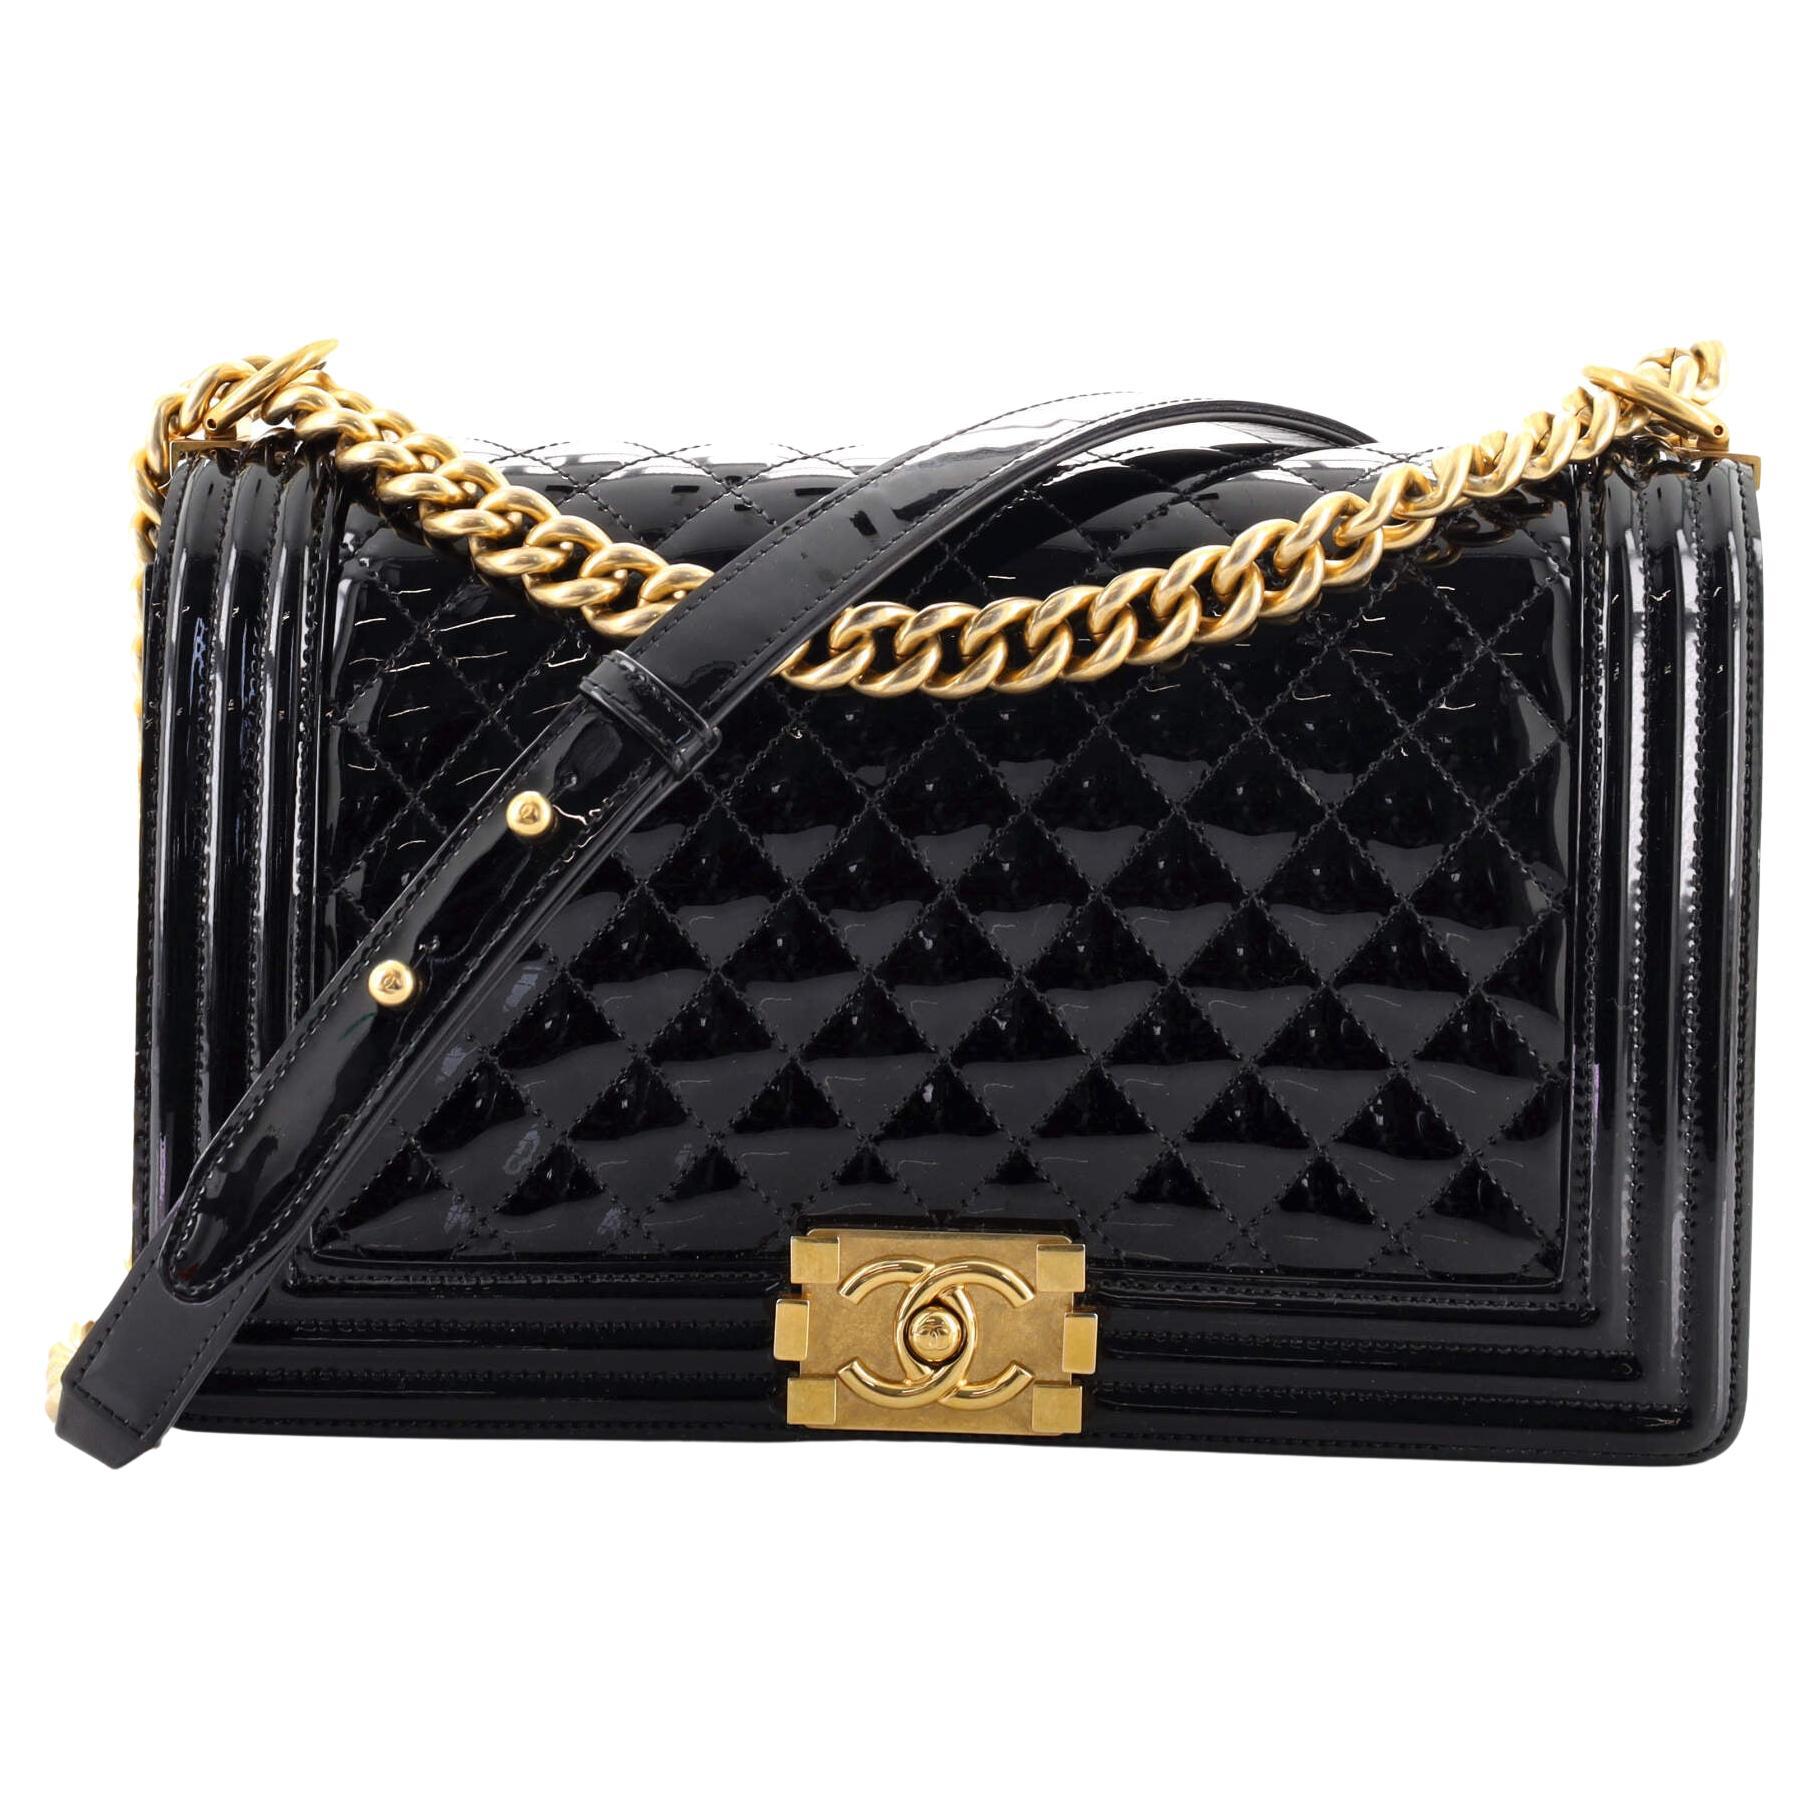 Chanel Boy Flap Bag Quilted Patent New Medium